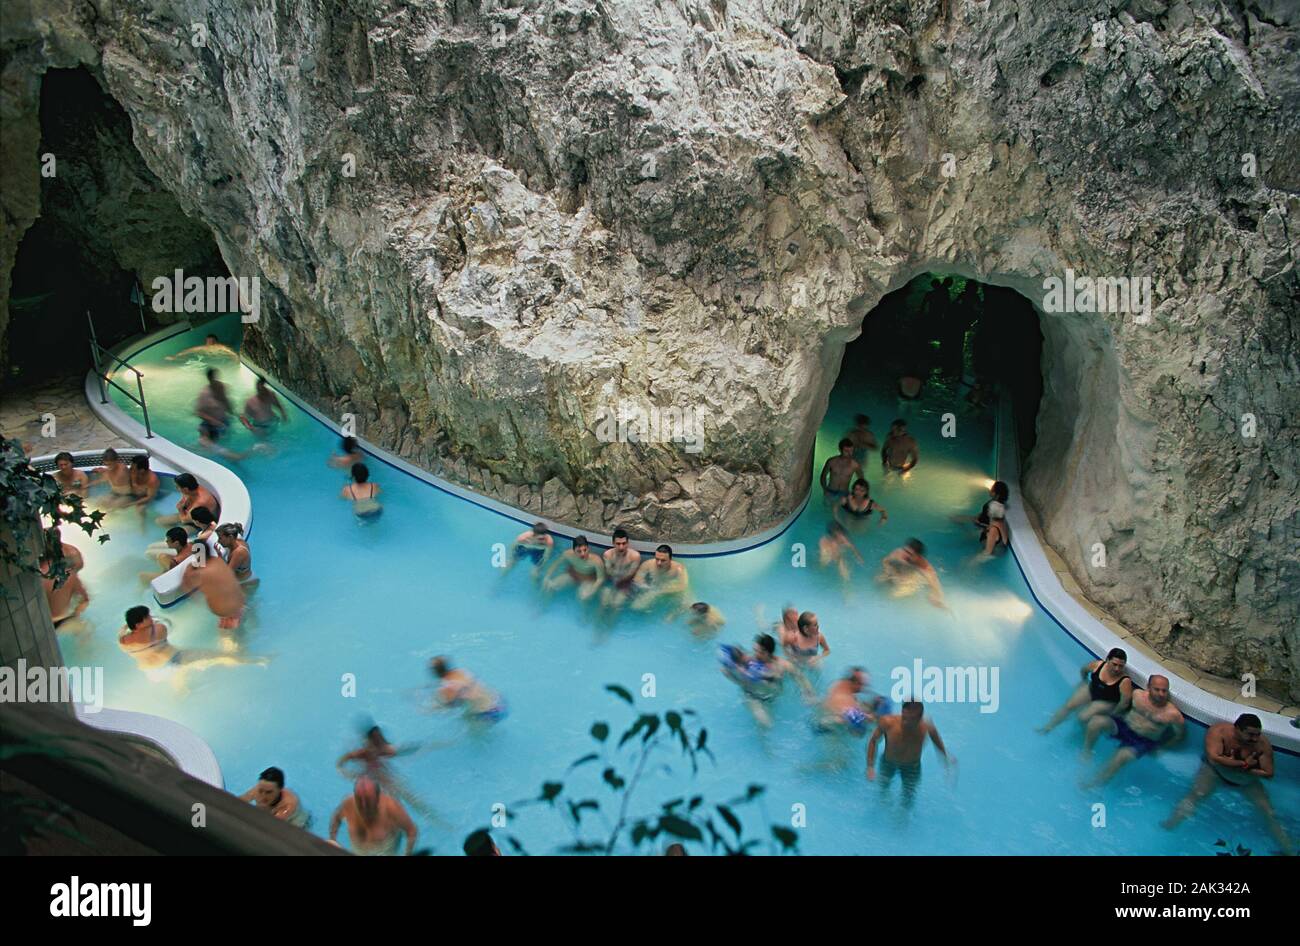 A natural cave bath is a tourist attraction in Tapolca, a suburb of the town Miskolc, Hungary. (Undated picture) | usage worldwide Stock Photo